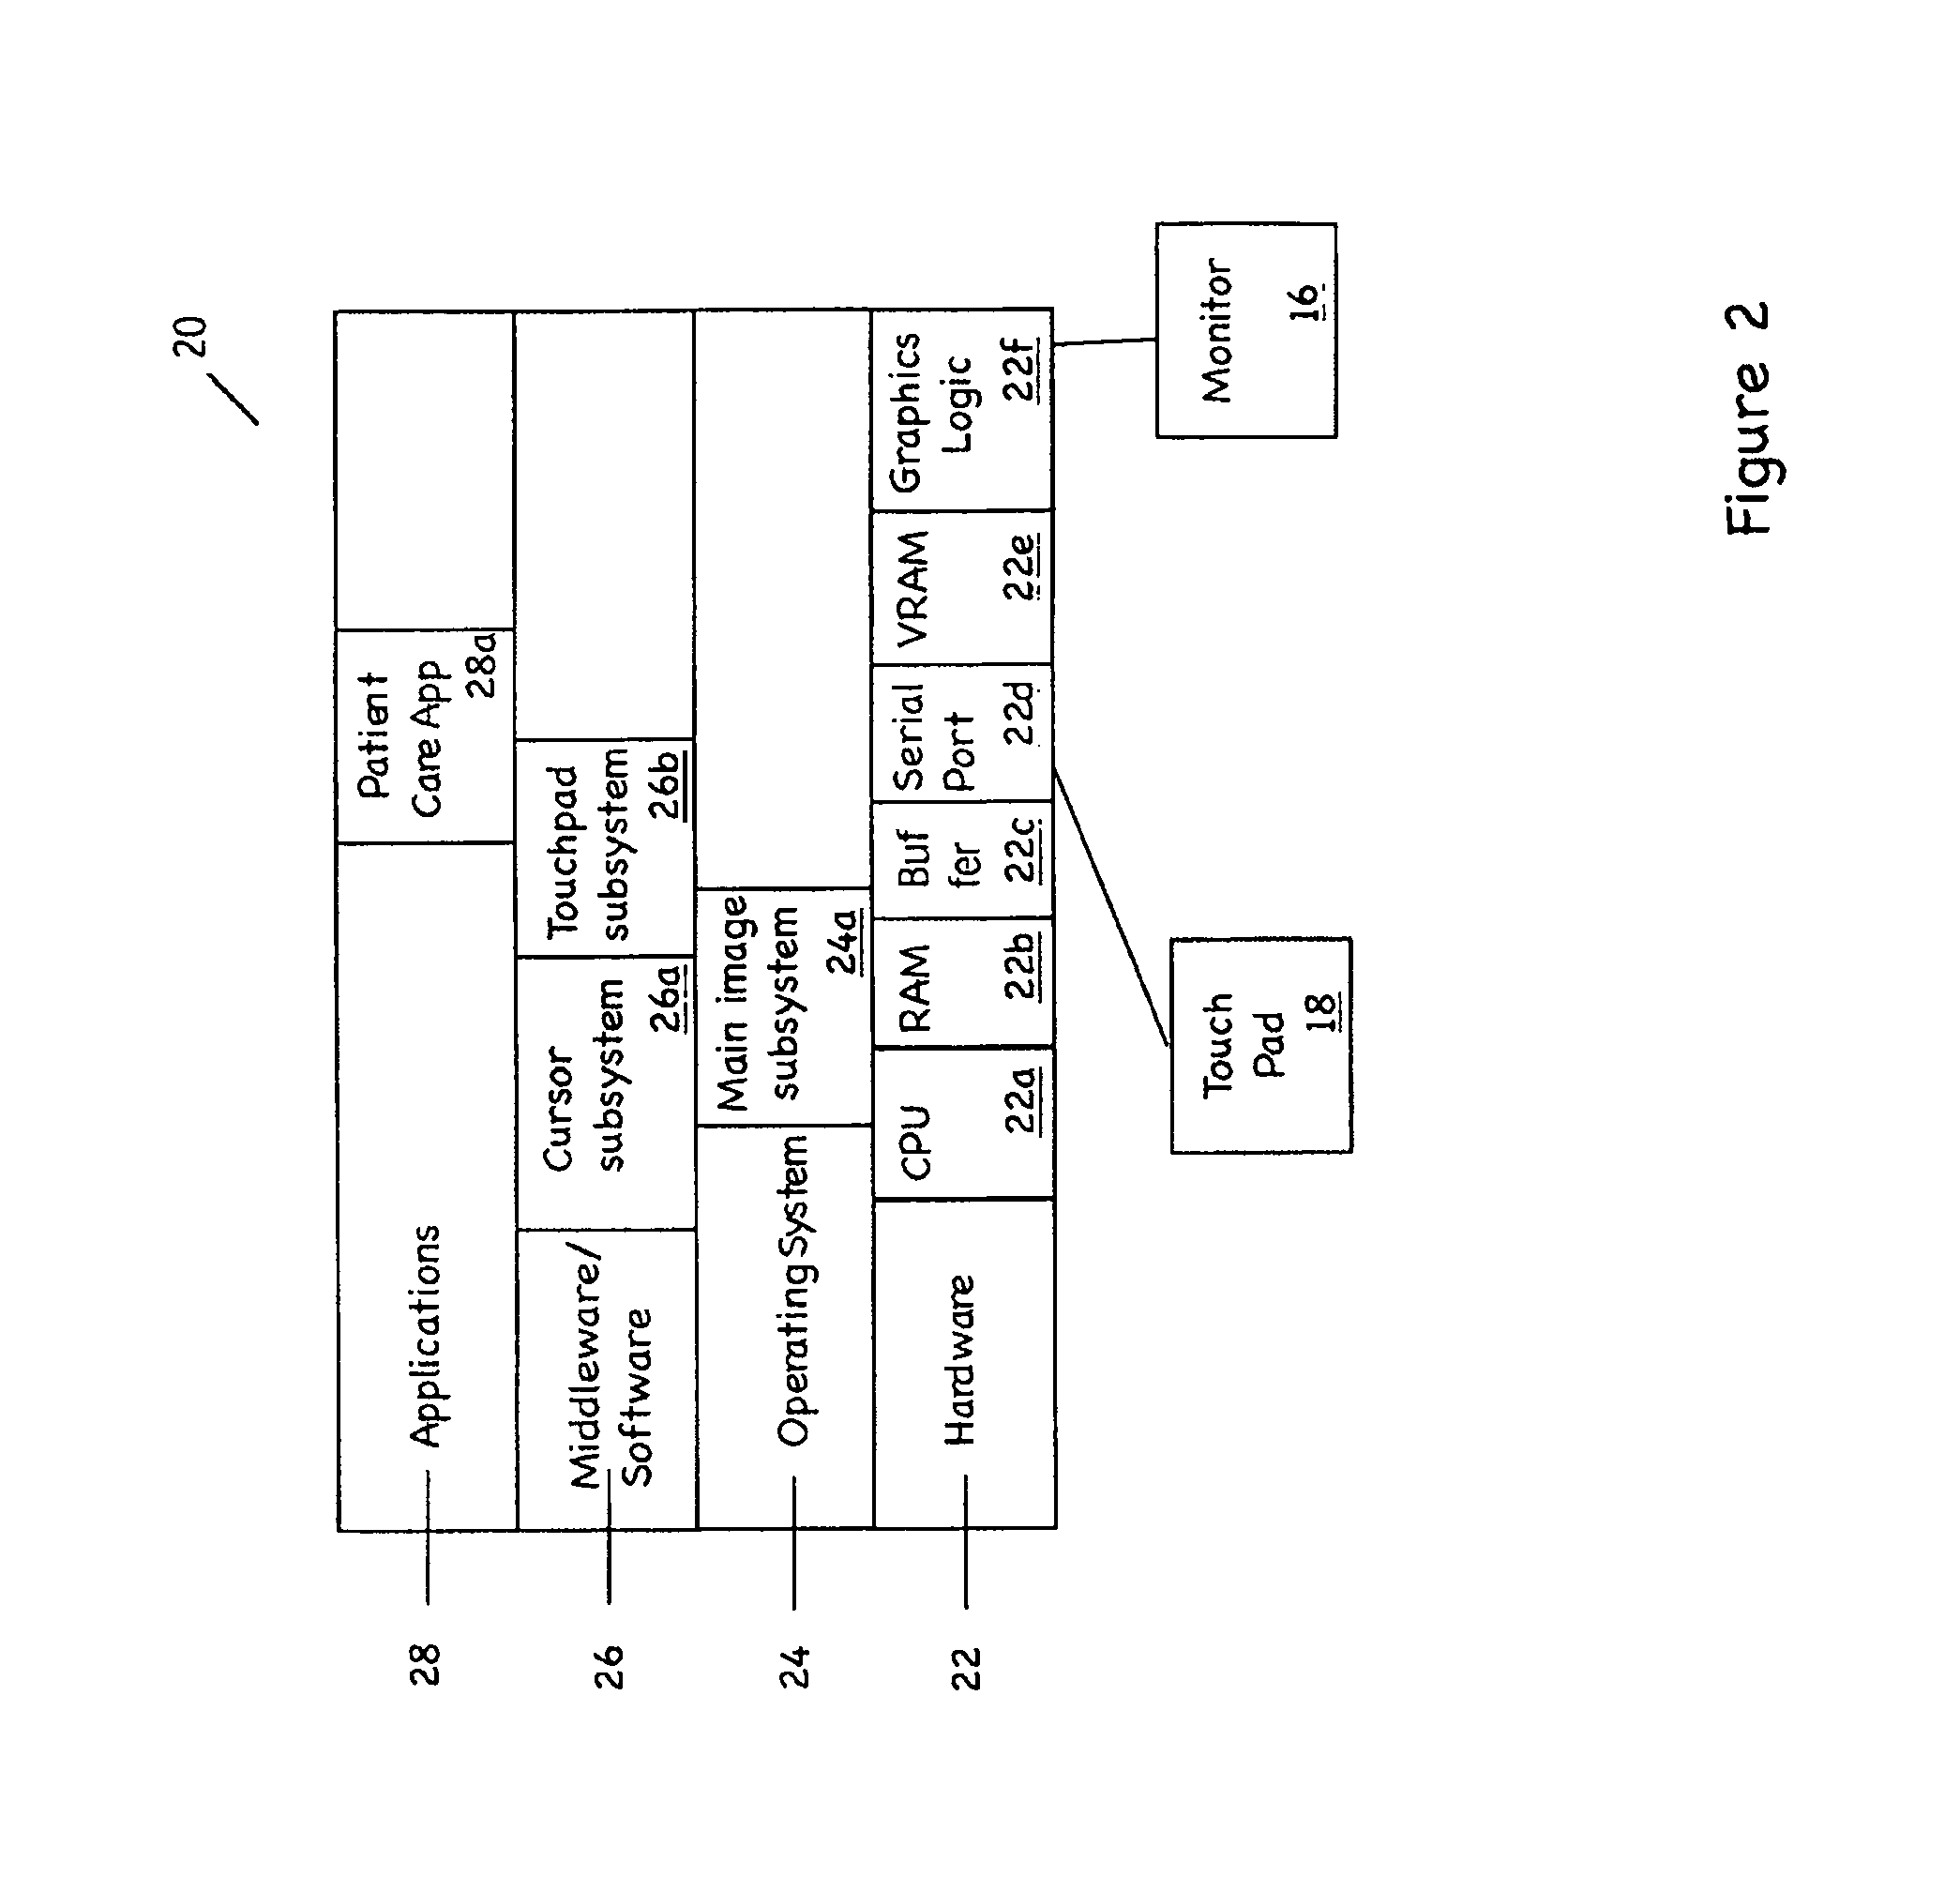 Methods and apparatus for medical device cursor control and touchpad-based navigation